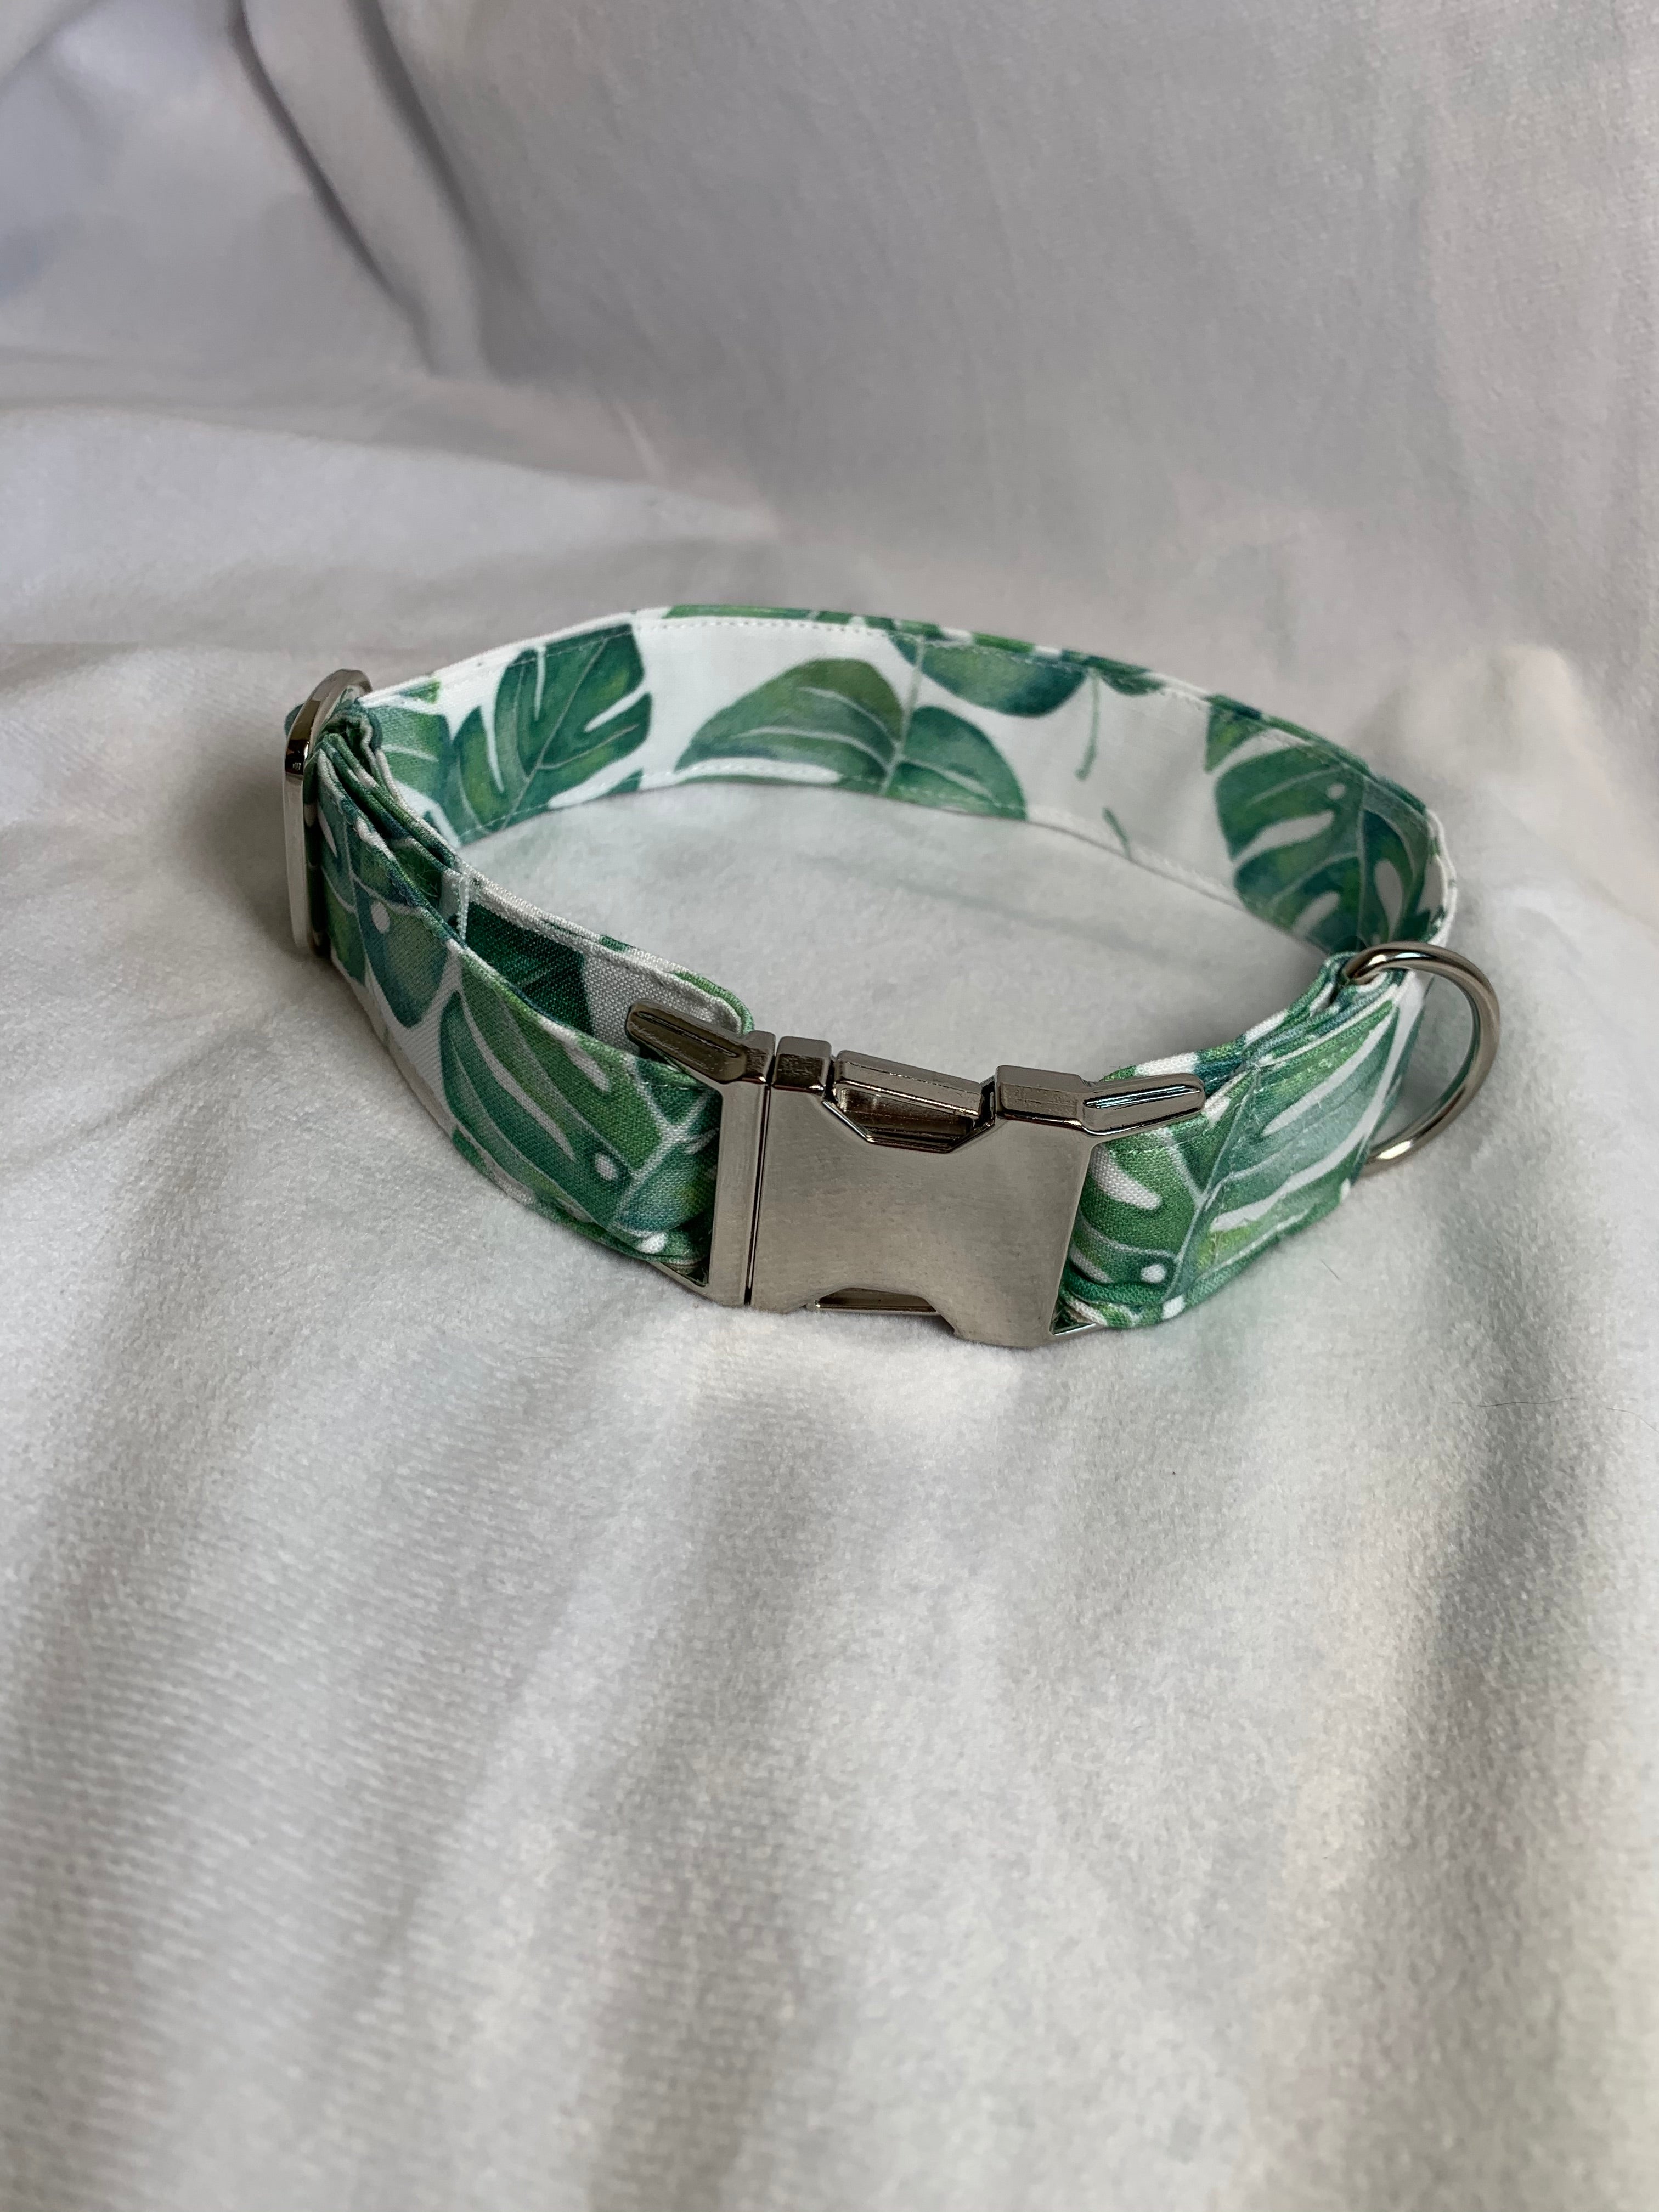 Unbe-Leaf-Able Collar